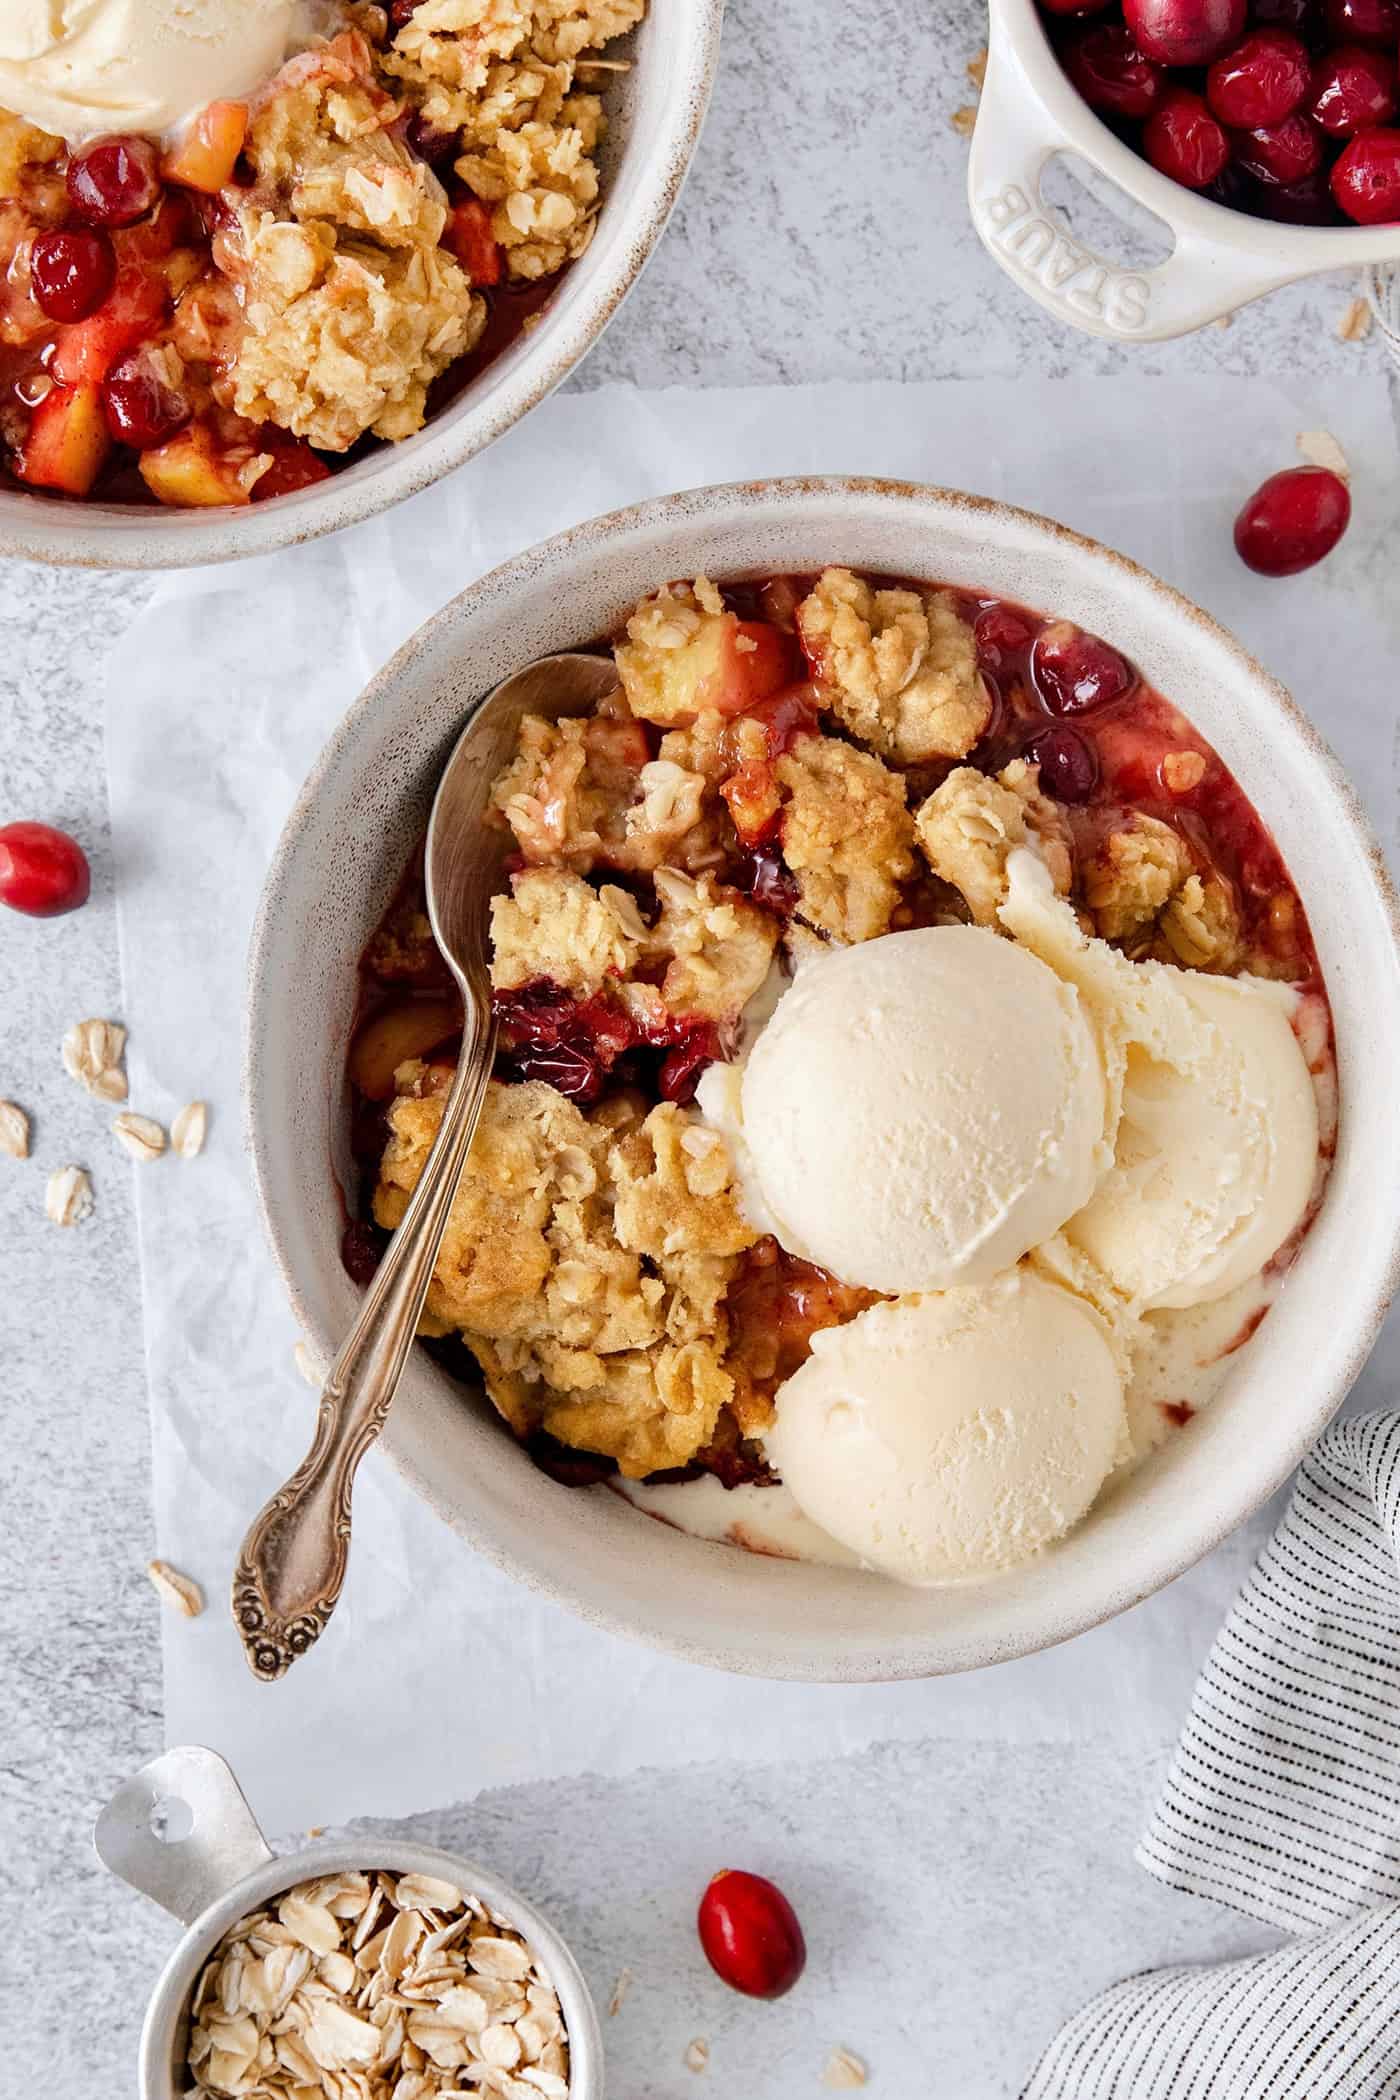 A white bowl of cranberry apple crisp with a spoon and topped with scoops of vanilla ice cream.